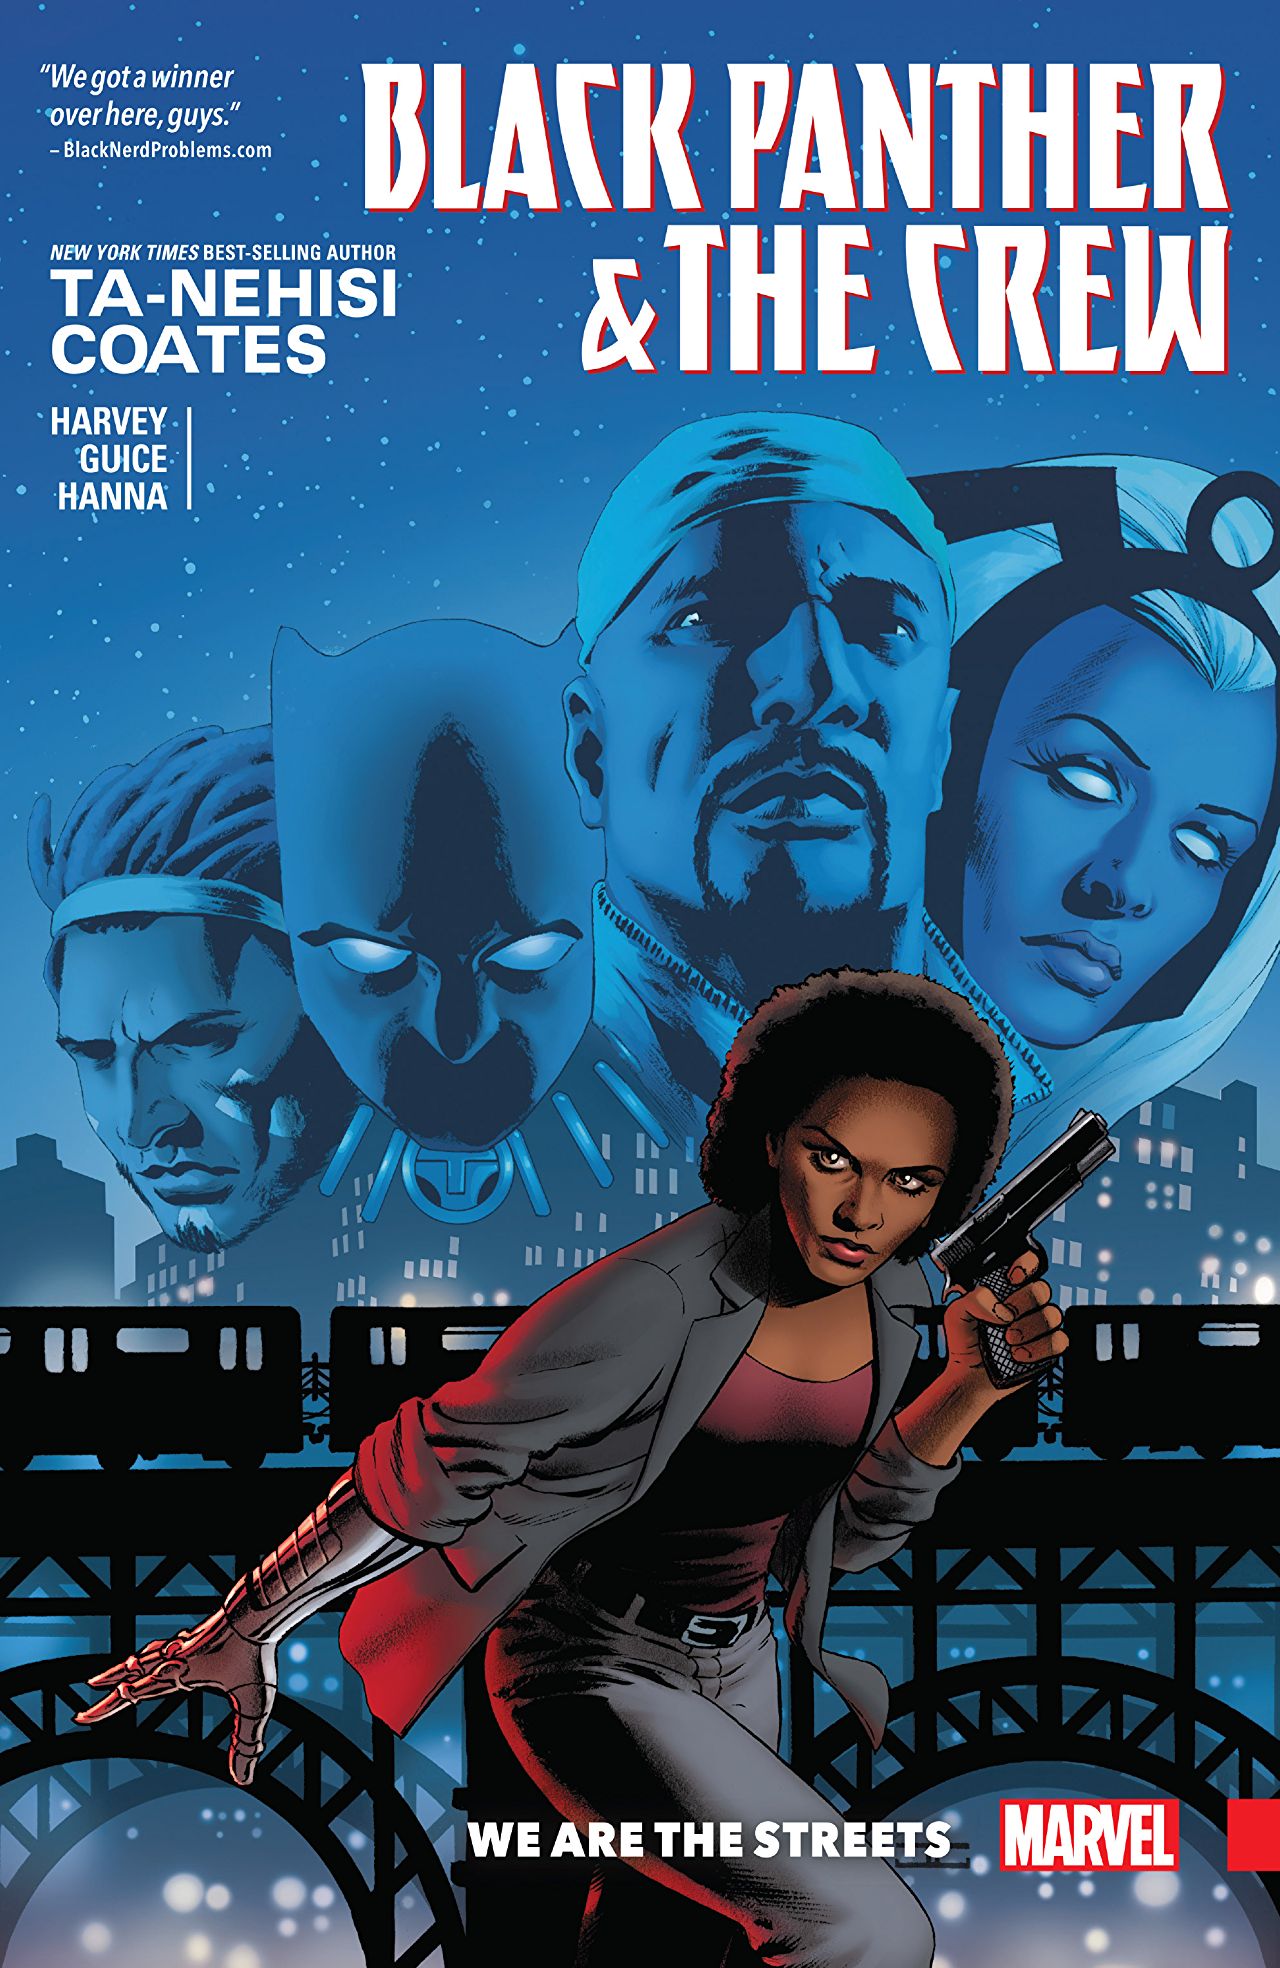 'Black Panther & the Crew: We Are the Streets' review: Coates mixes real-world problems with superheroes